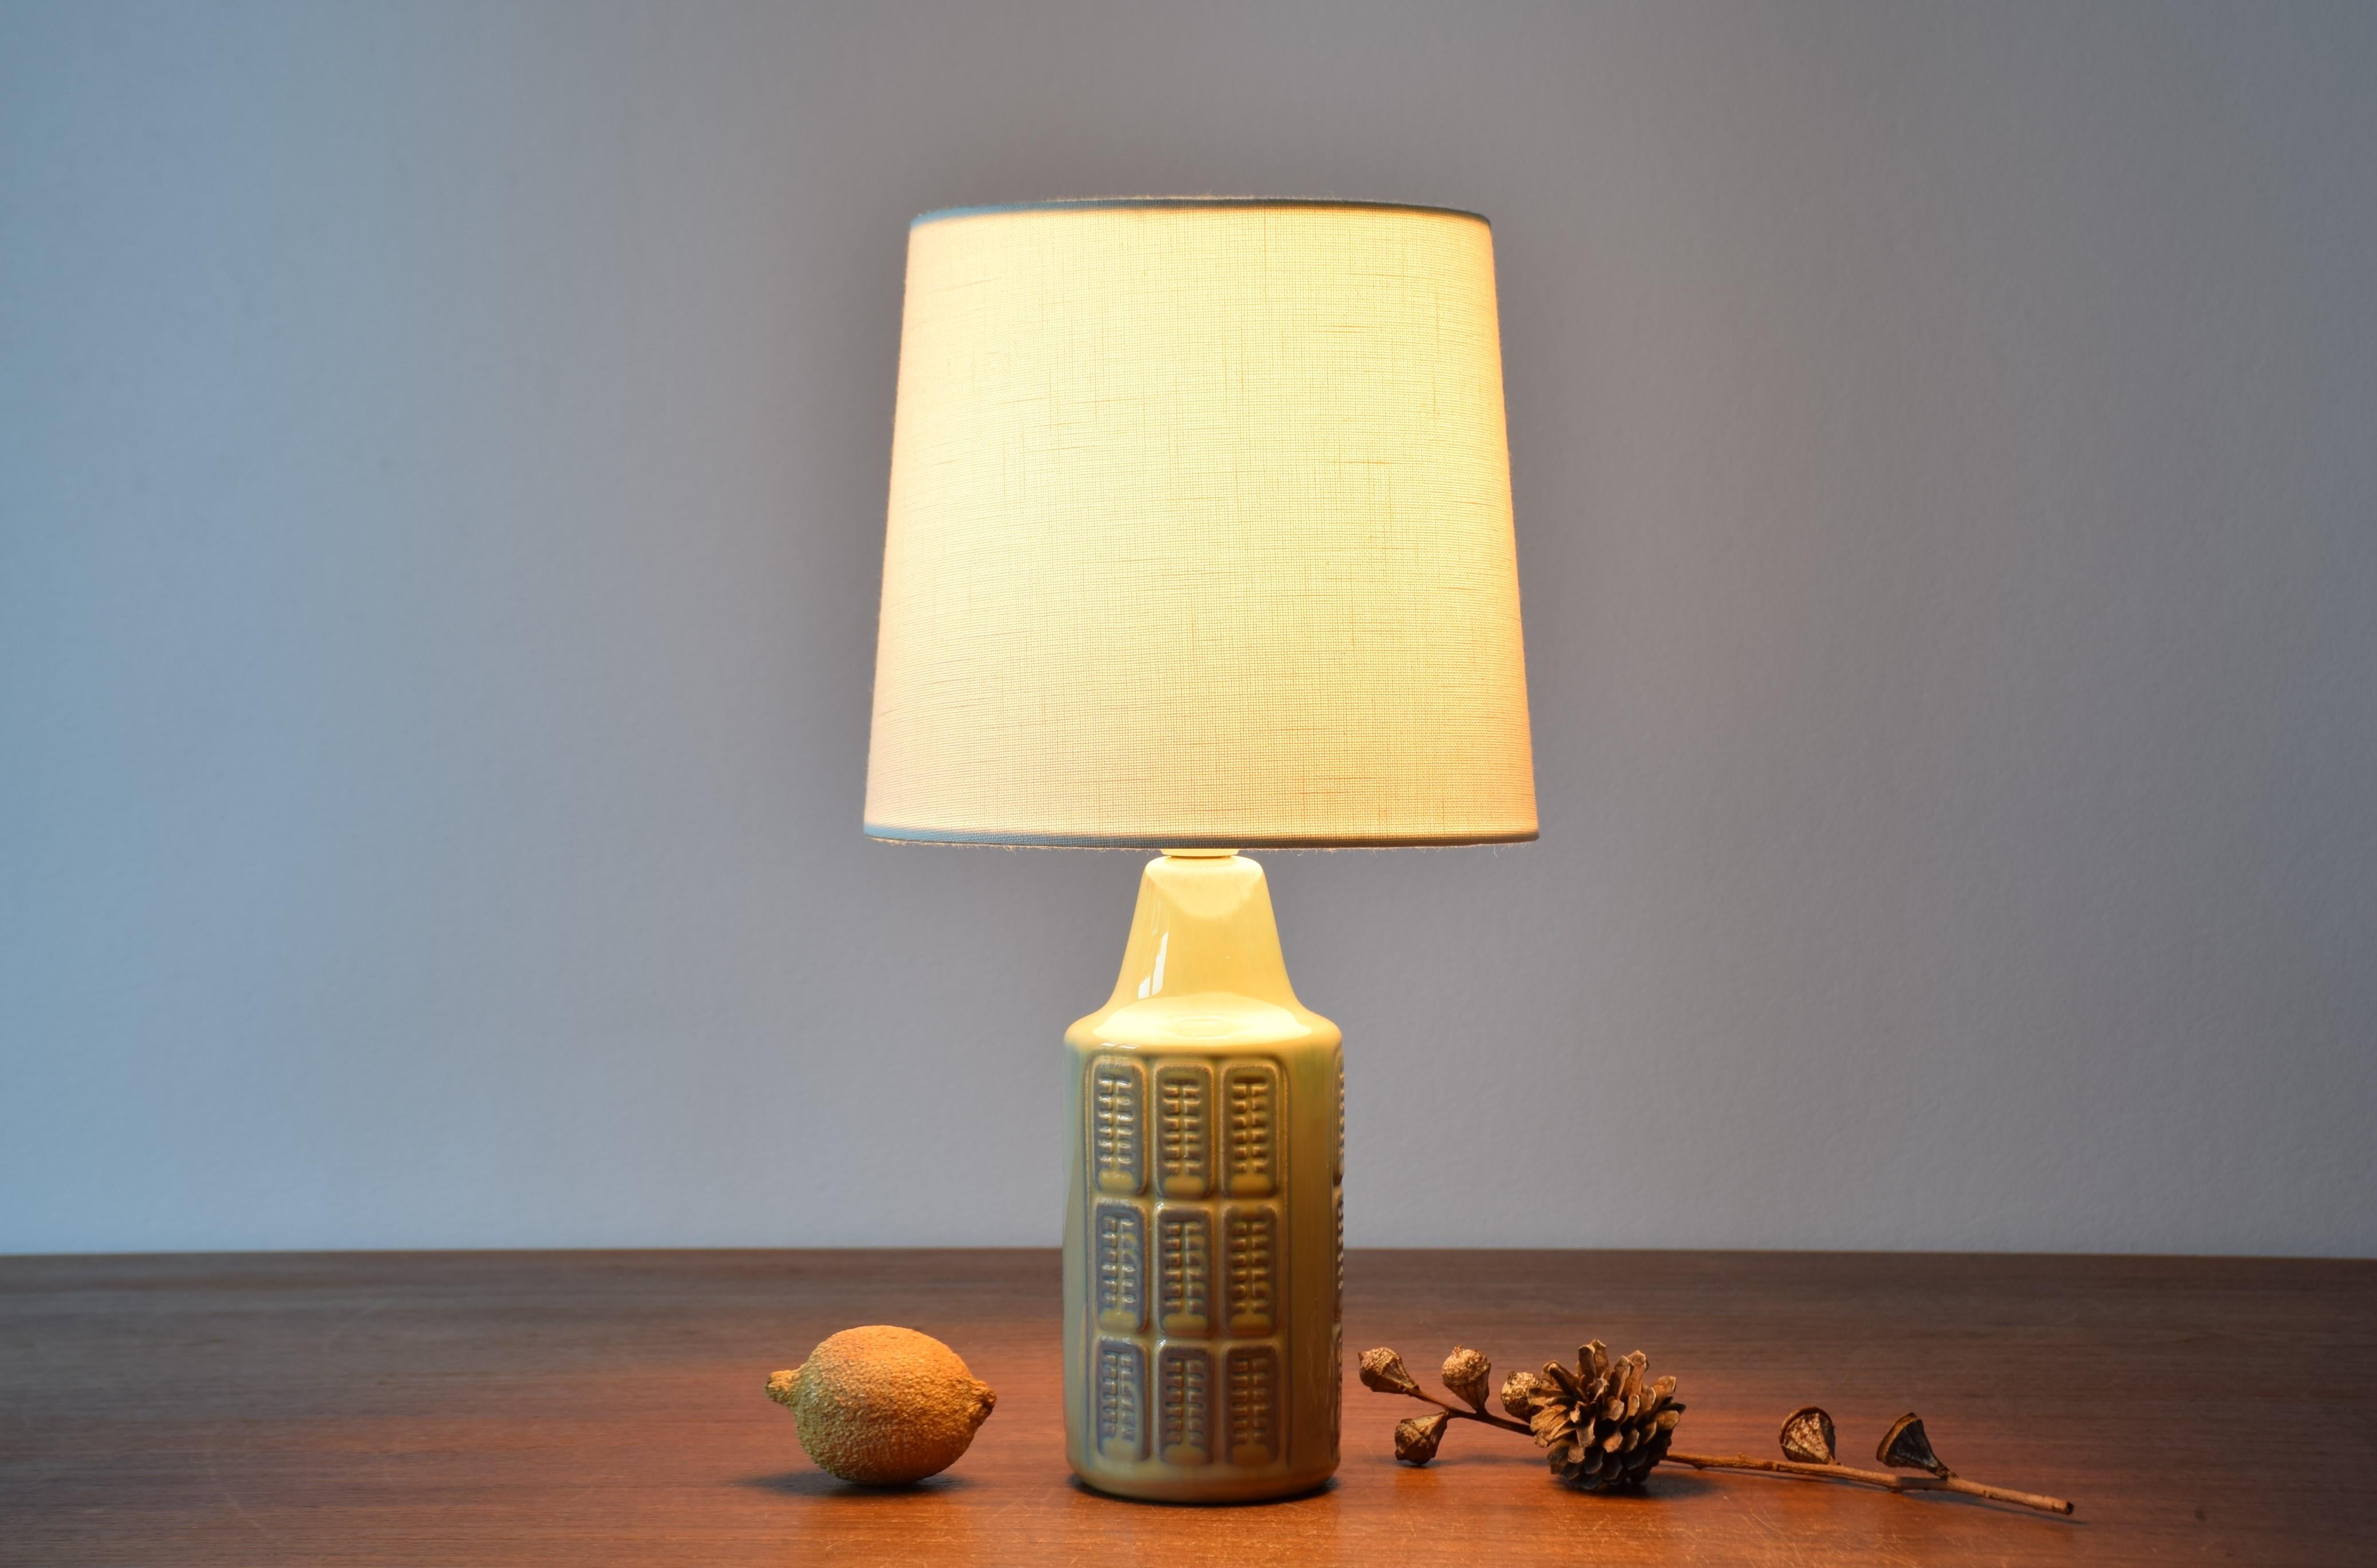 Small table lamp by Einar Johansen for Søholm Stentøj, Denmark, circa 1960s.
The lamp has a shiny pistachio green glaze with pale purple elements over an embossed repeated graphic decor. 

Included is a new clip on lamp shade designed and made in